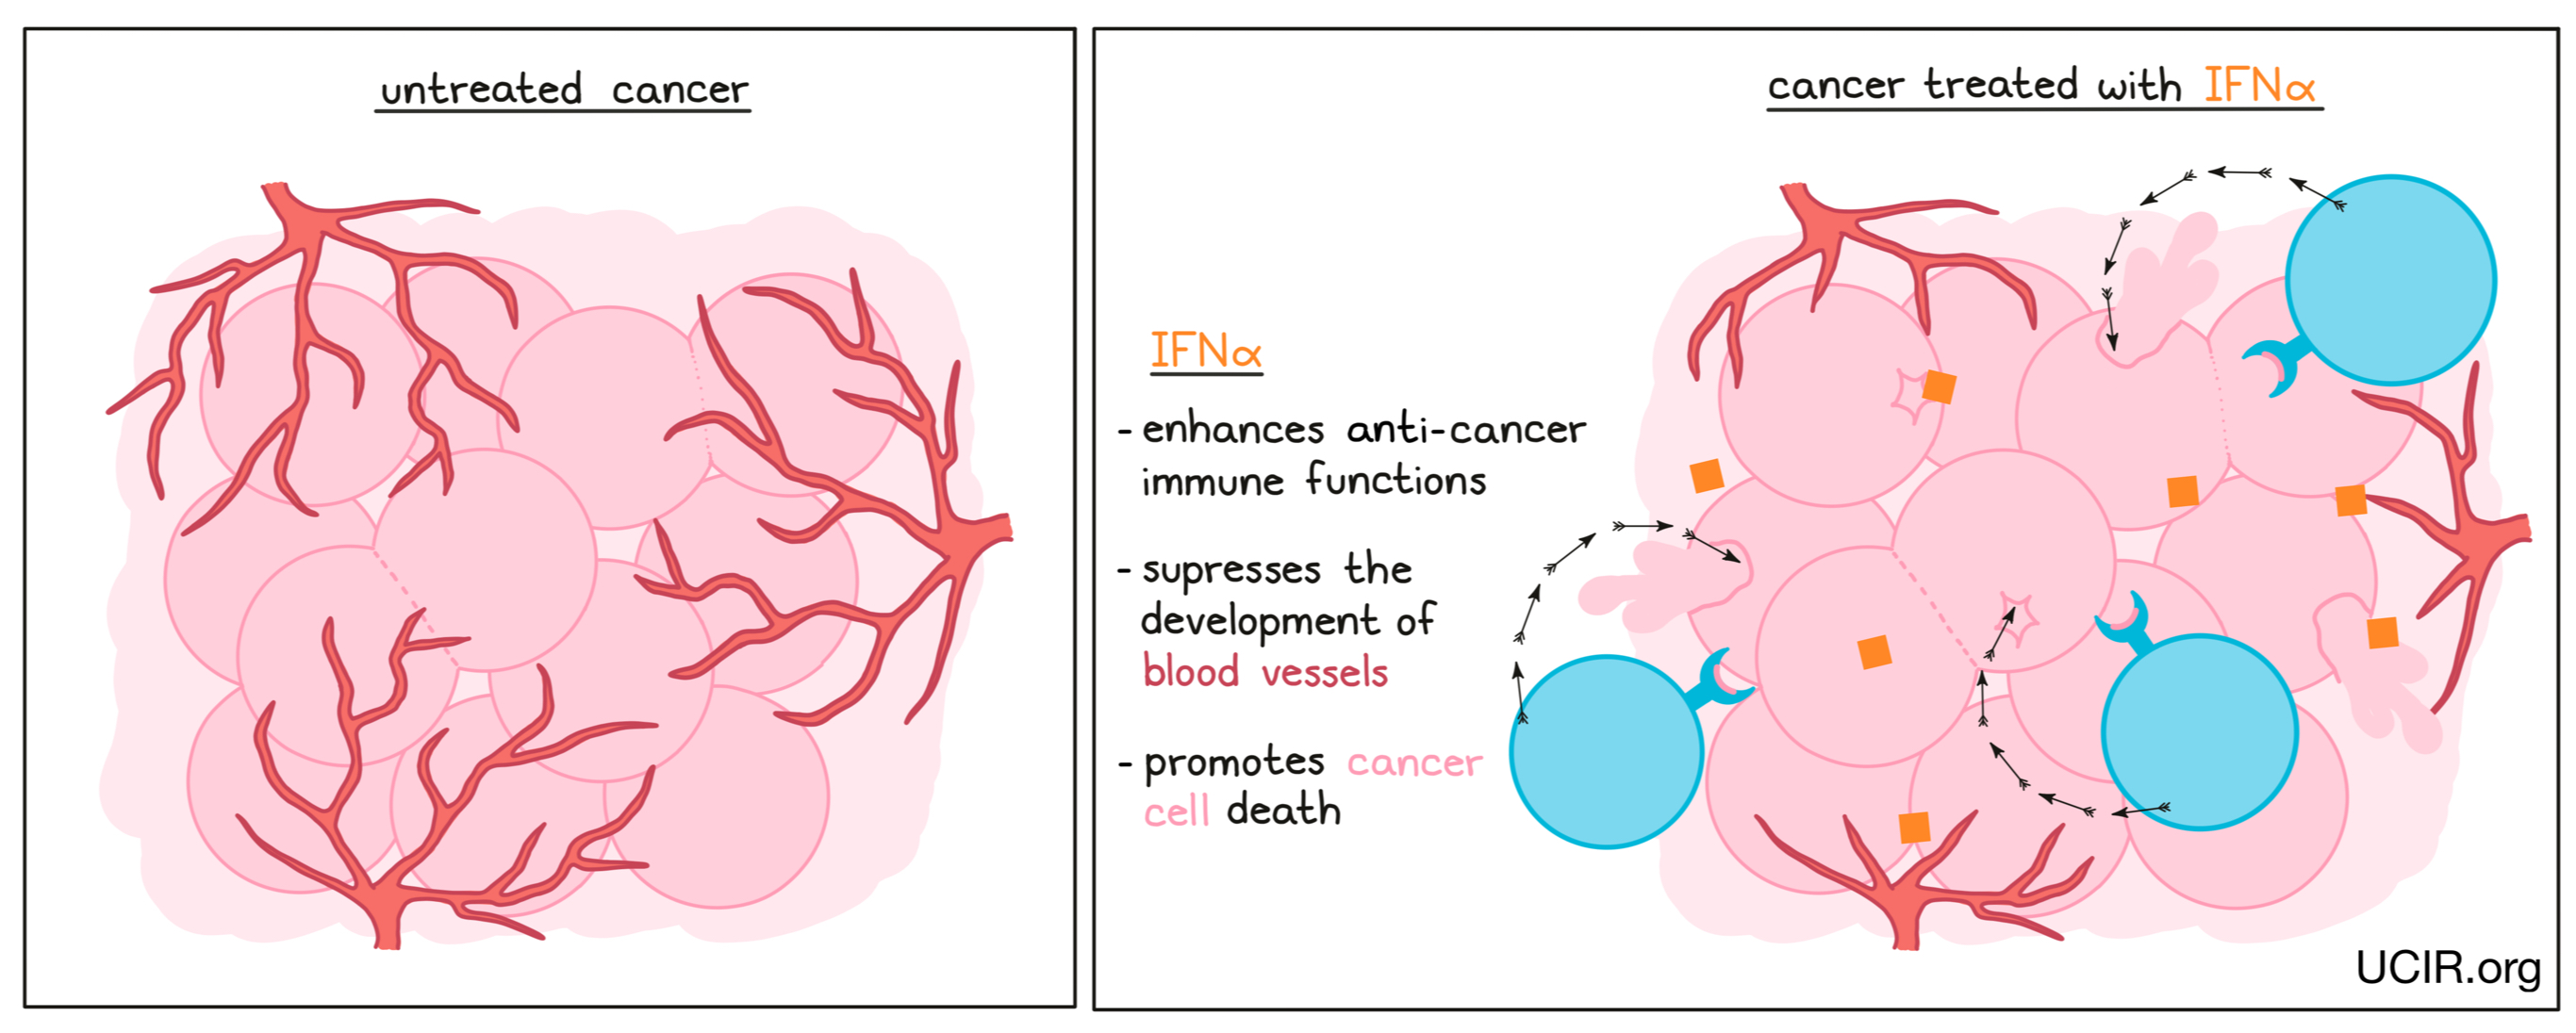 Illustration showing the difference between an untreated cancer vs a cancer treated with IFNα